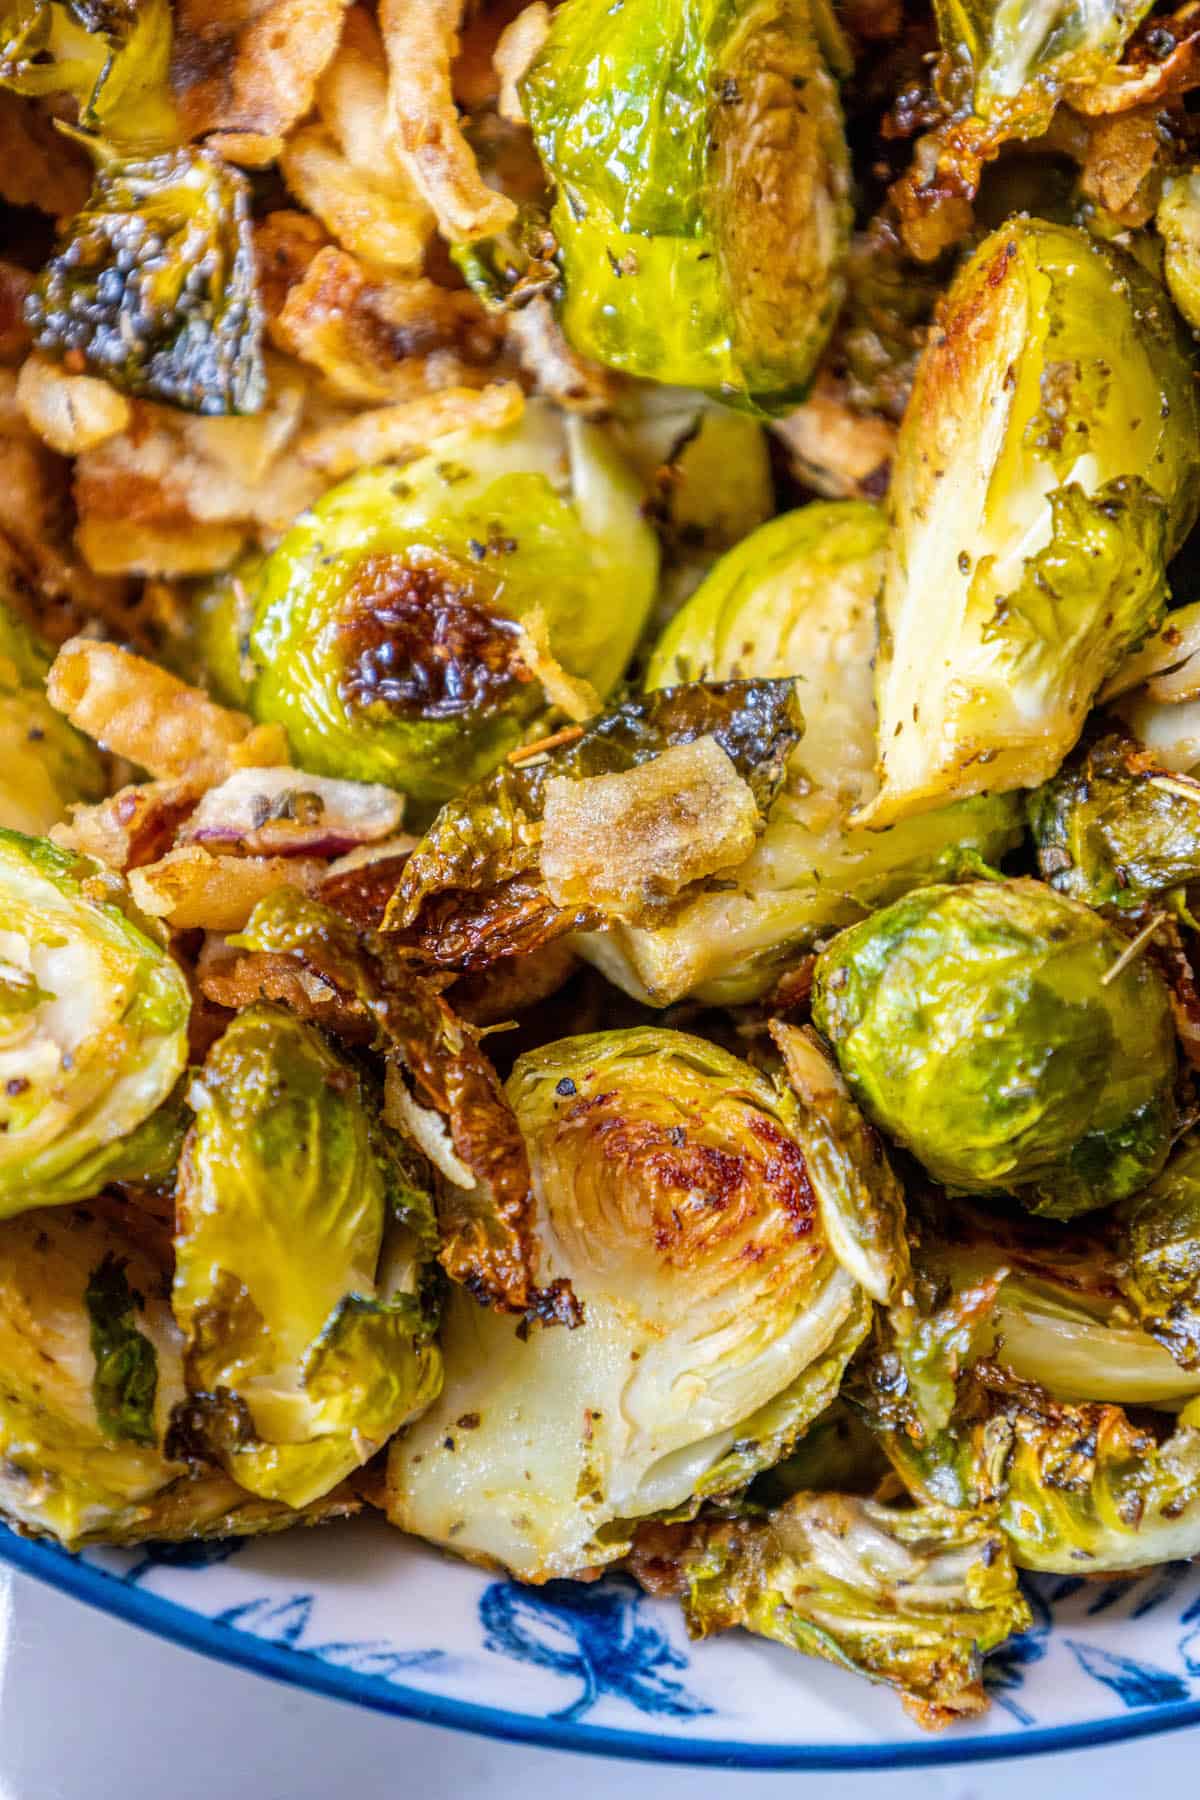 Roasted Brussels sprouts in a blue and white bowl.